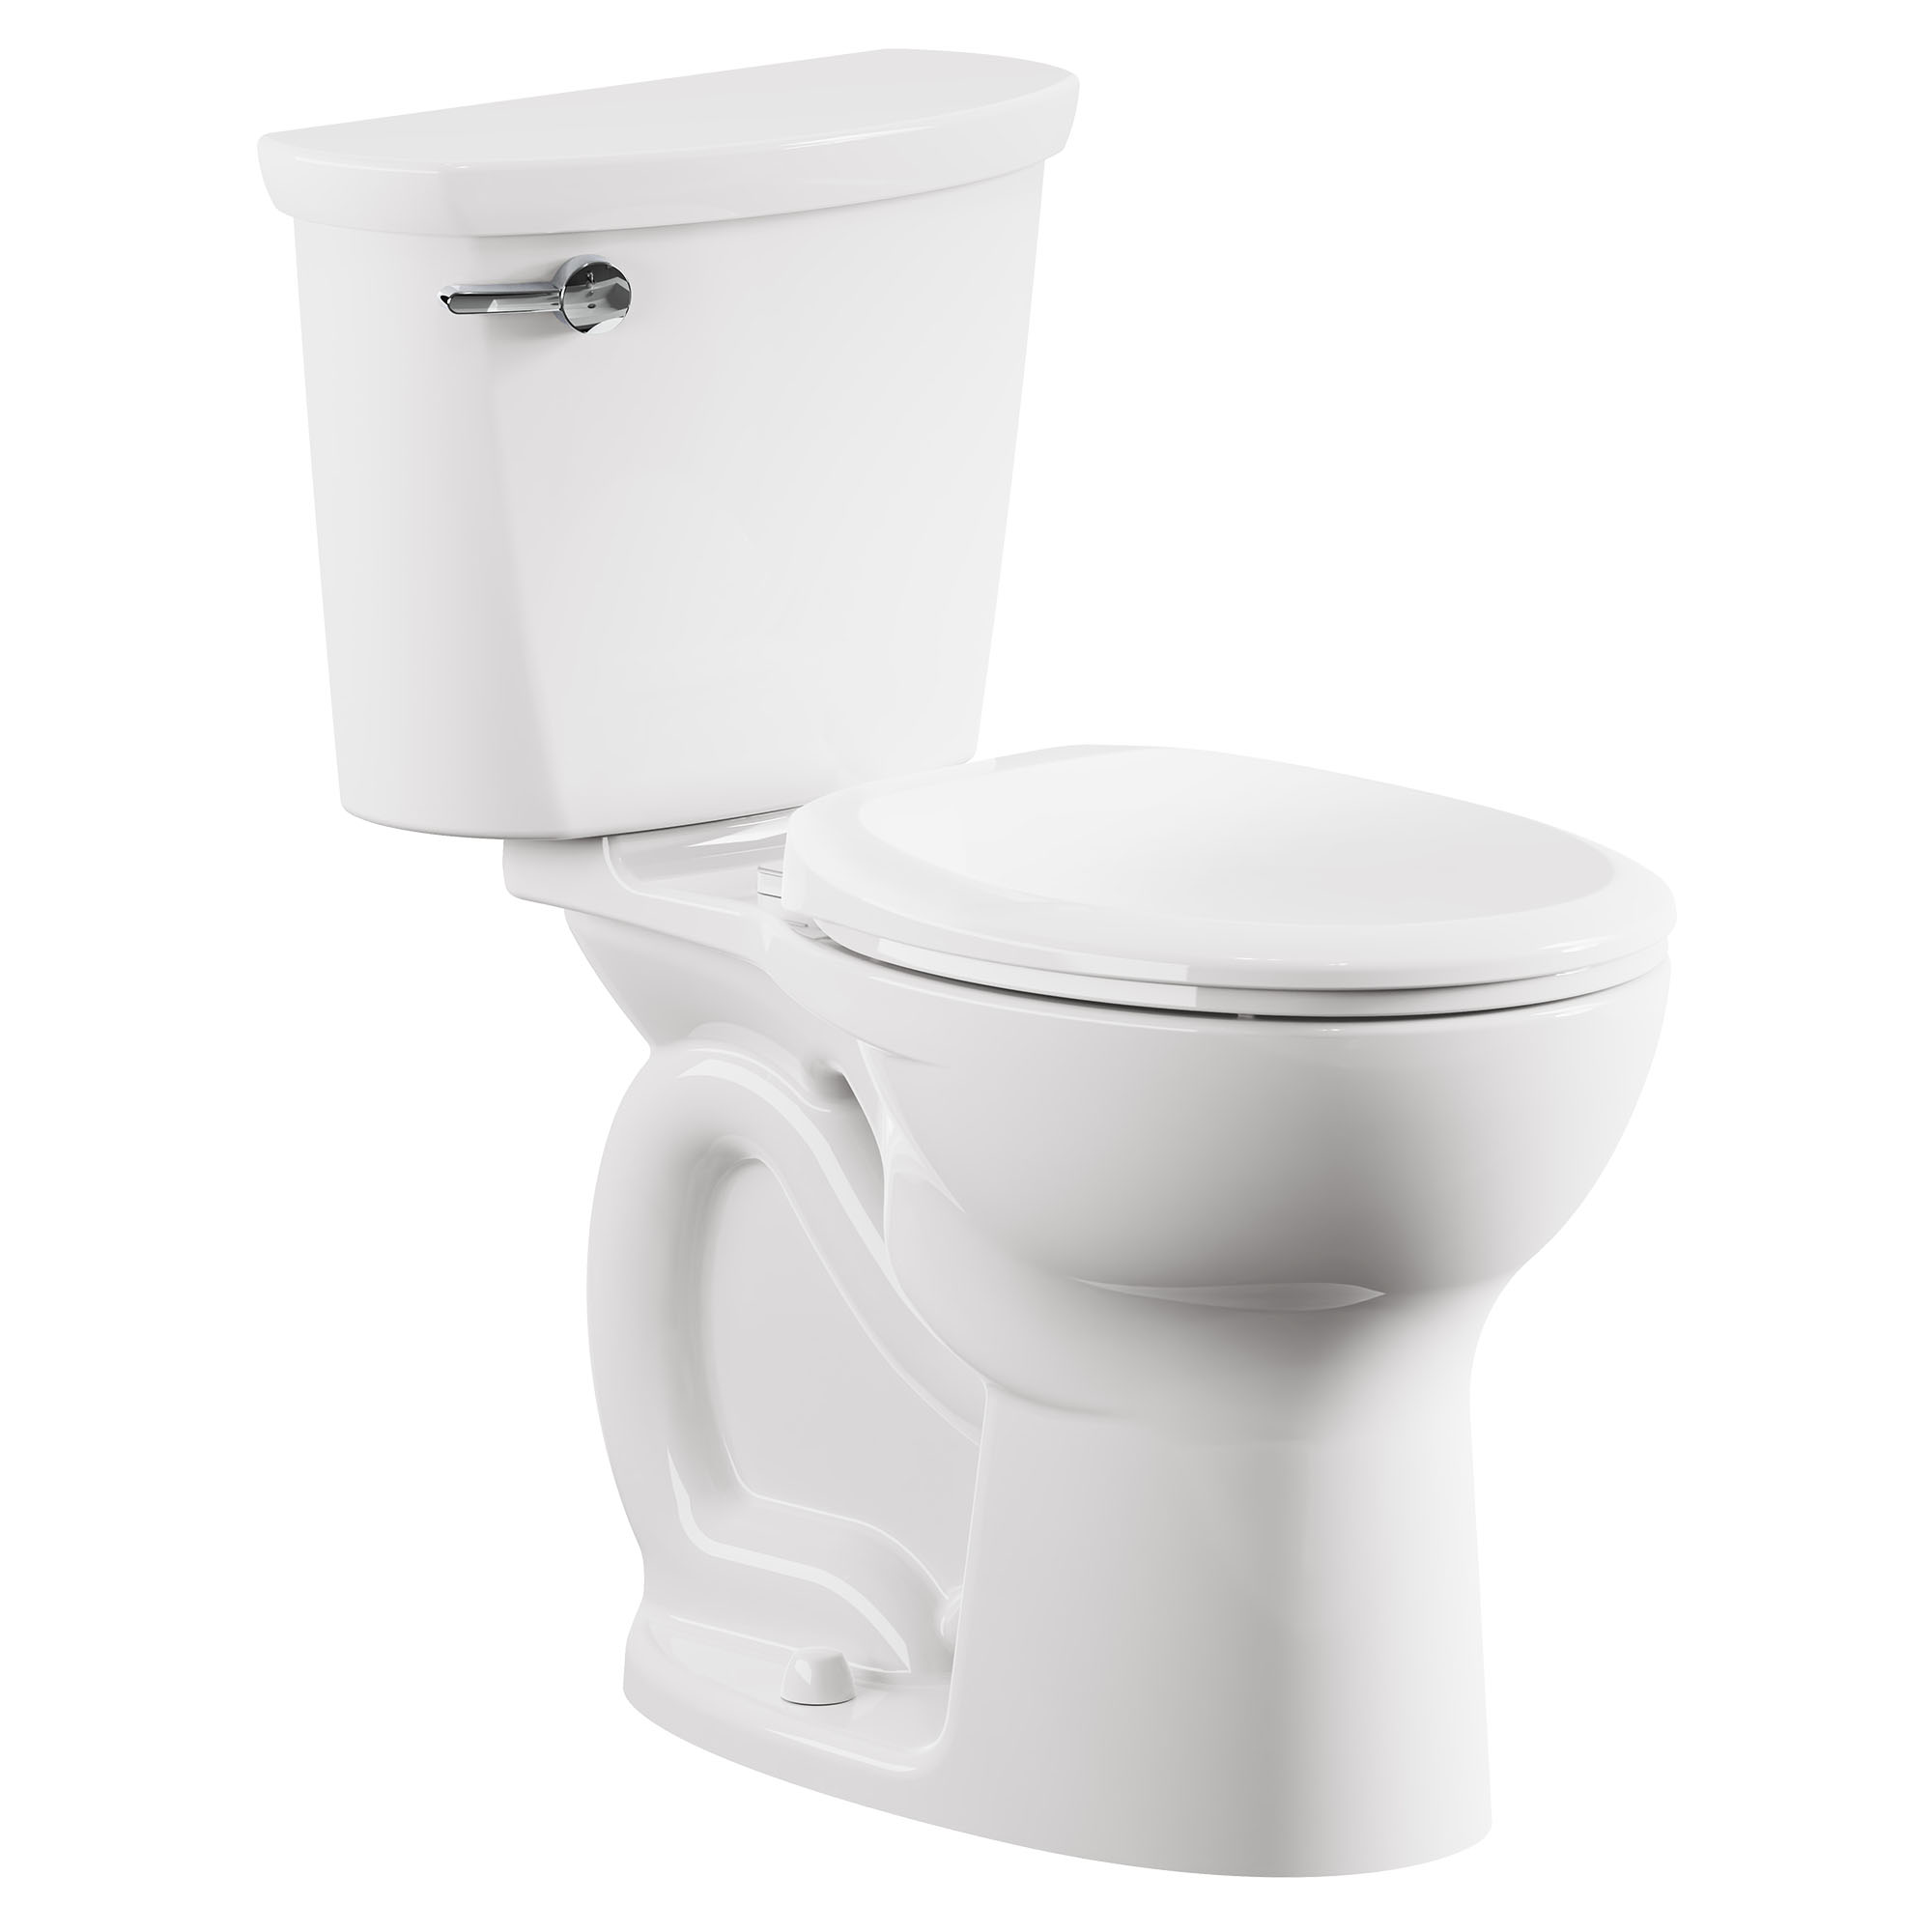 Cadet® PRO Two-Piece 1.6 gpf/6.0 Lpf Chair Height Round Front 10-Inch Rough Toilet Less Seat